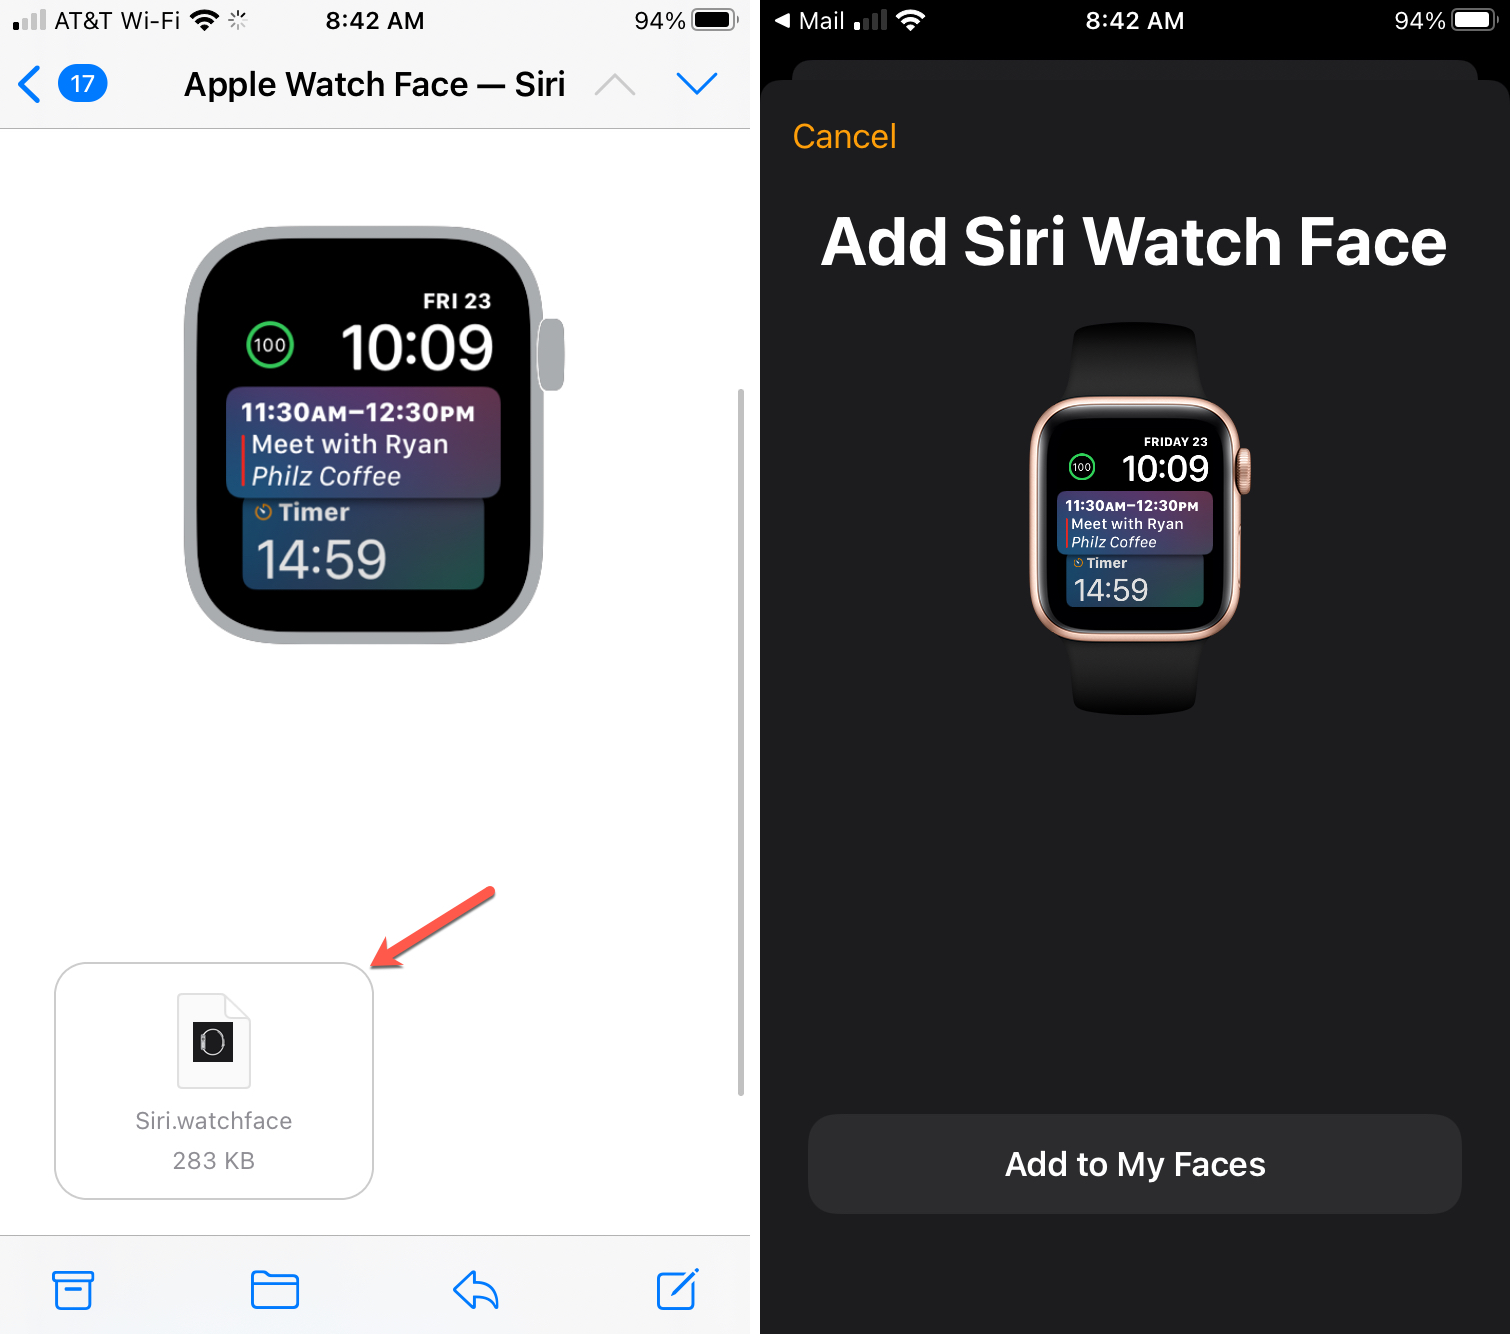 Add a Shared Watch Face From iPhone